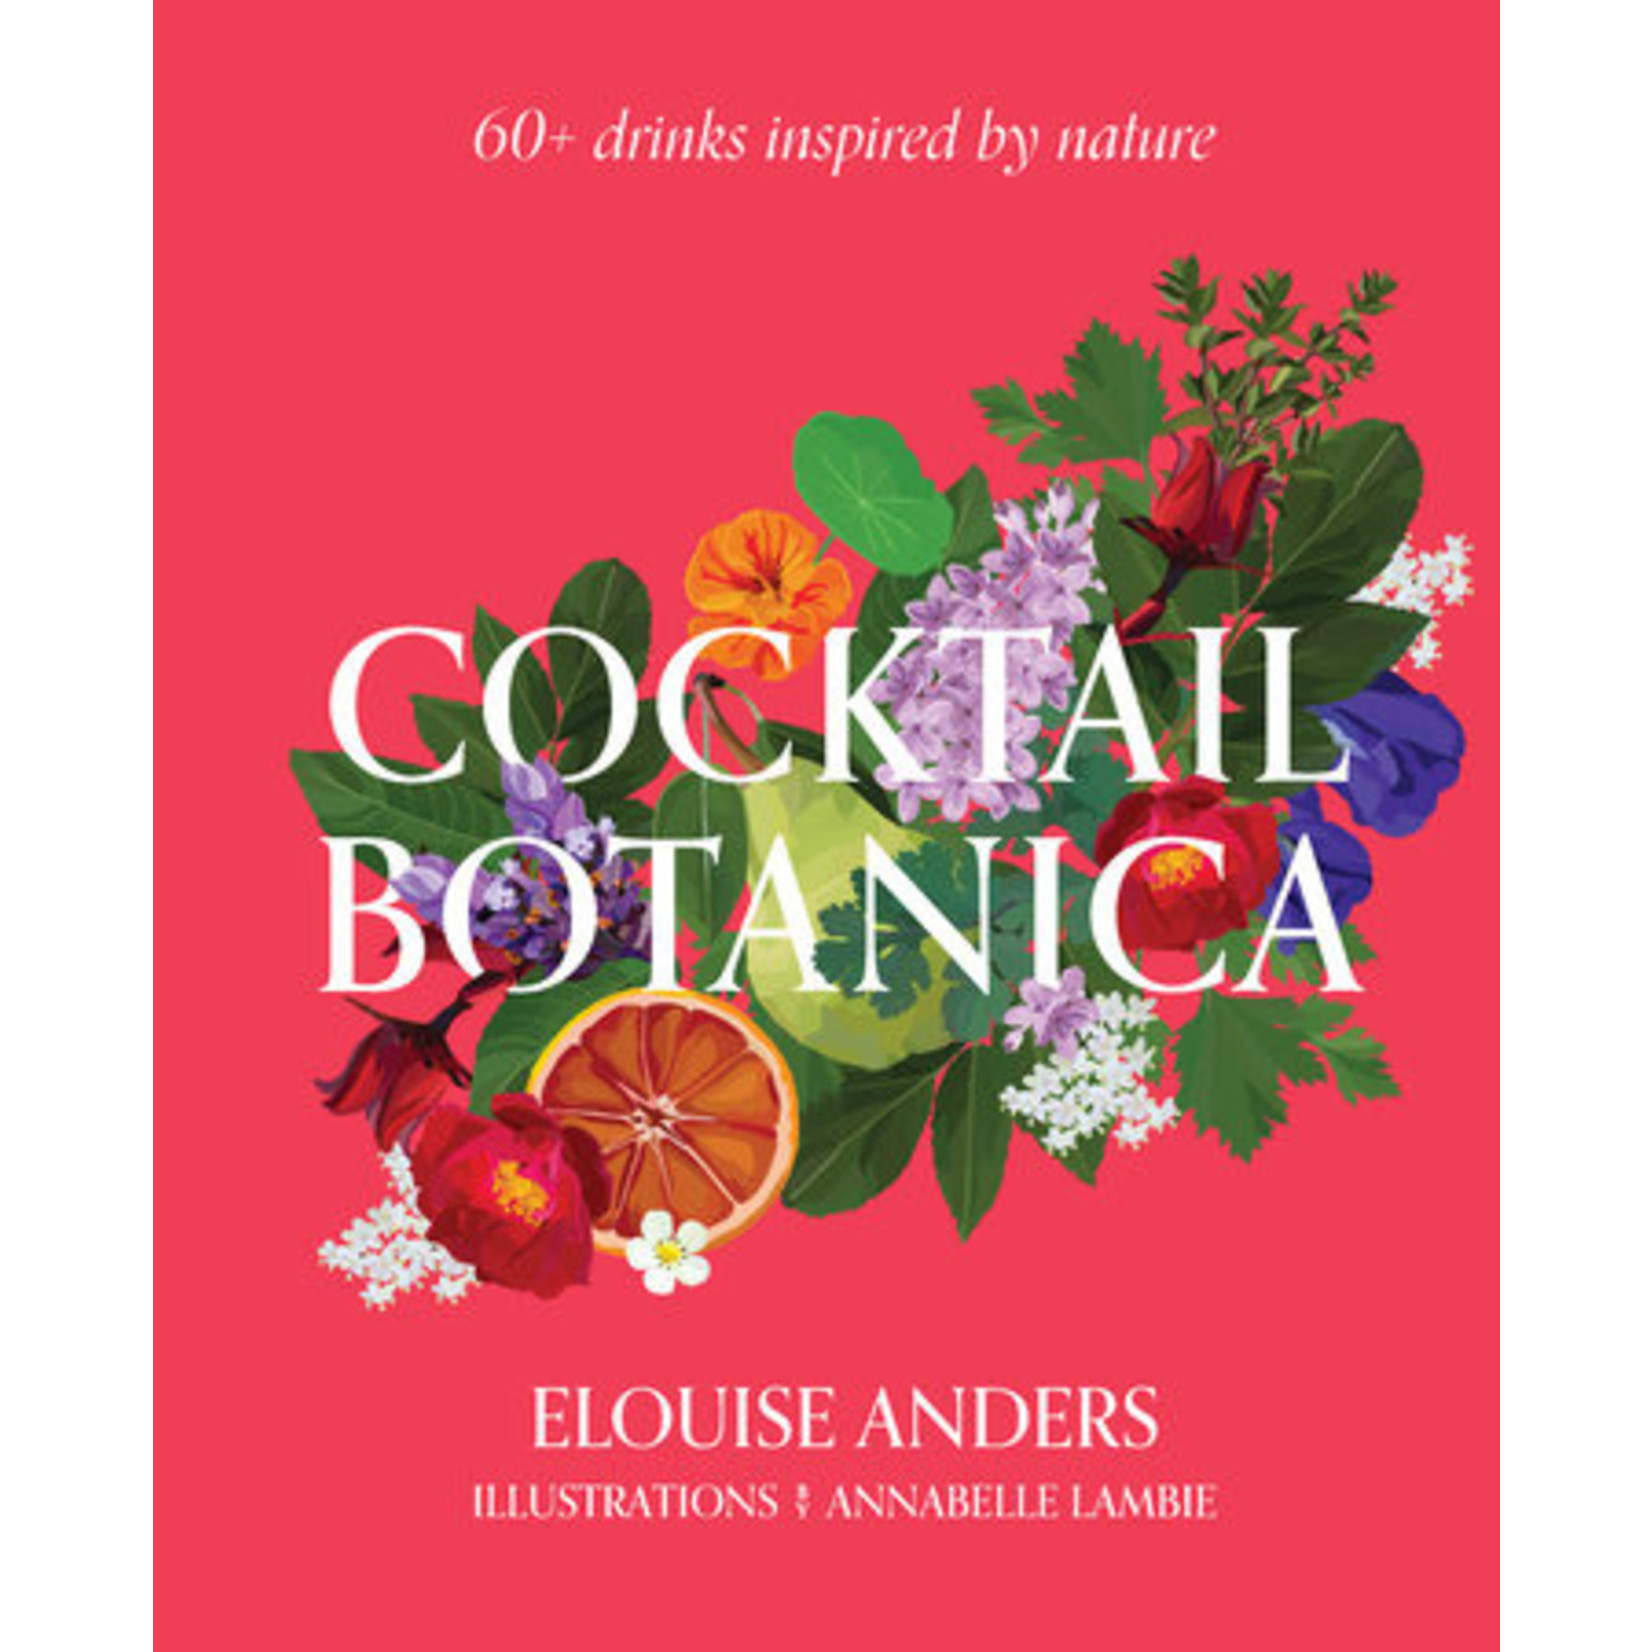 New spring cocktail books